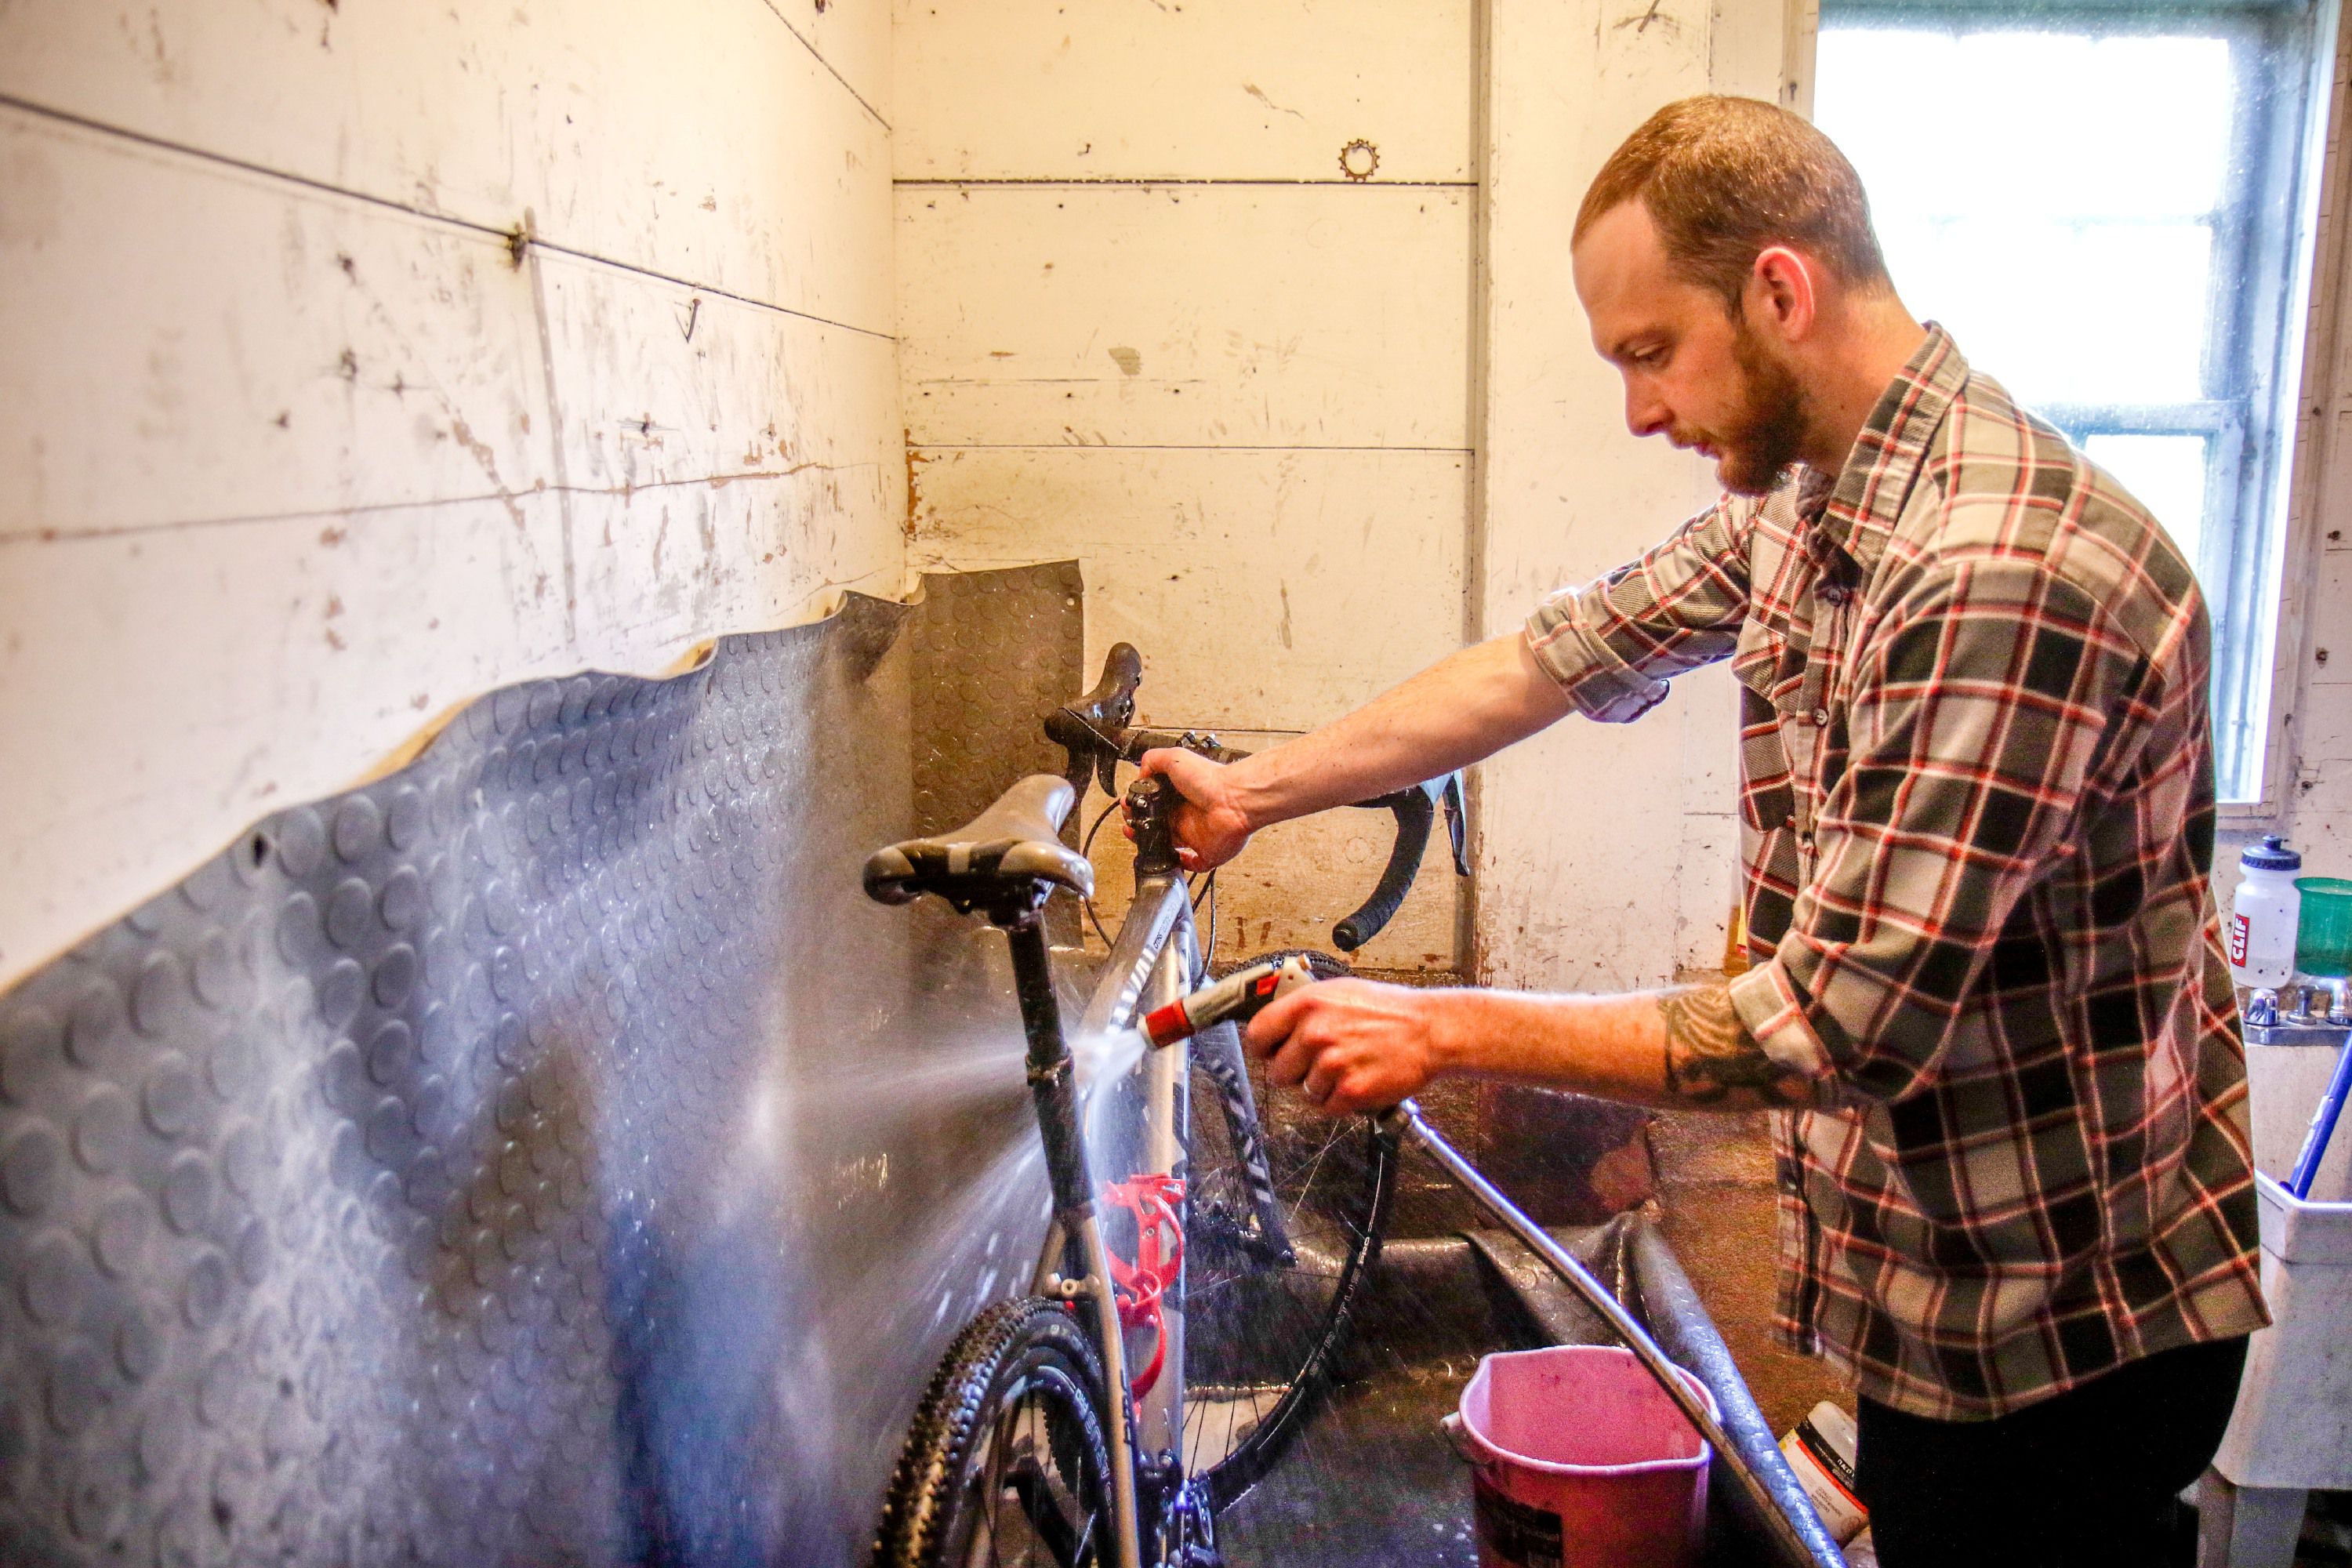 Robbie Boody, of Sharon, Vt., washes off a bike in Drummond Cycles in Enfield, N.H., on Wednesday, June 5, 2018. Each bike that comes into the shop for a tune up gets a standard washing treatment. (Valley News - August Frank) Copyright Valley News. May not be reprinted or used online without permission. Send requests to permission@vnews.com.